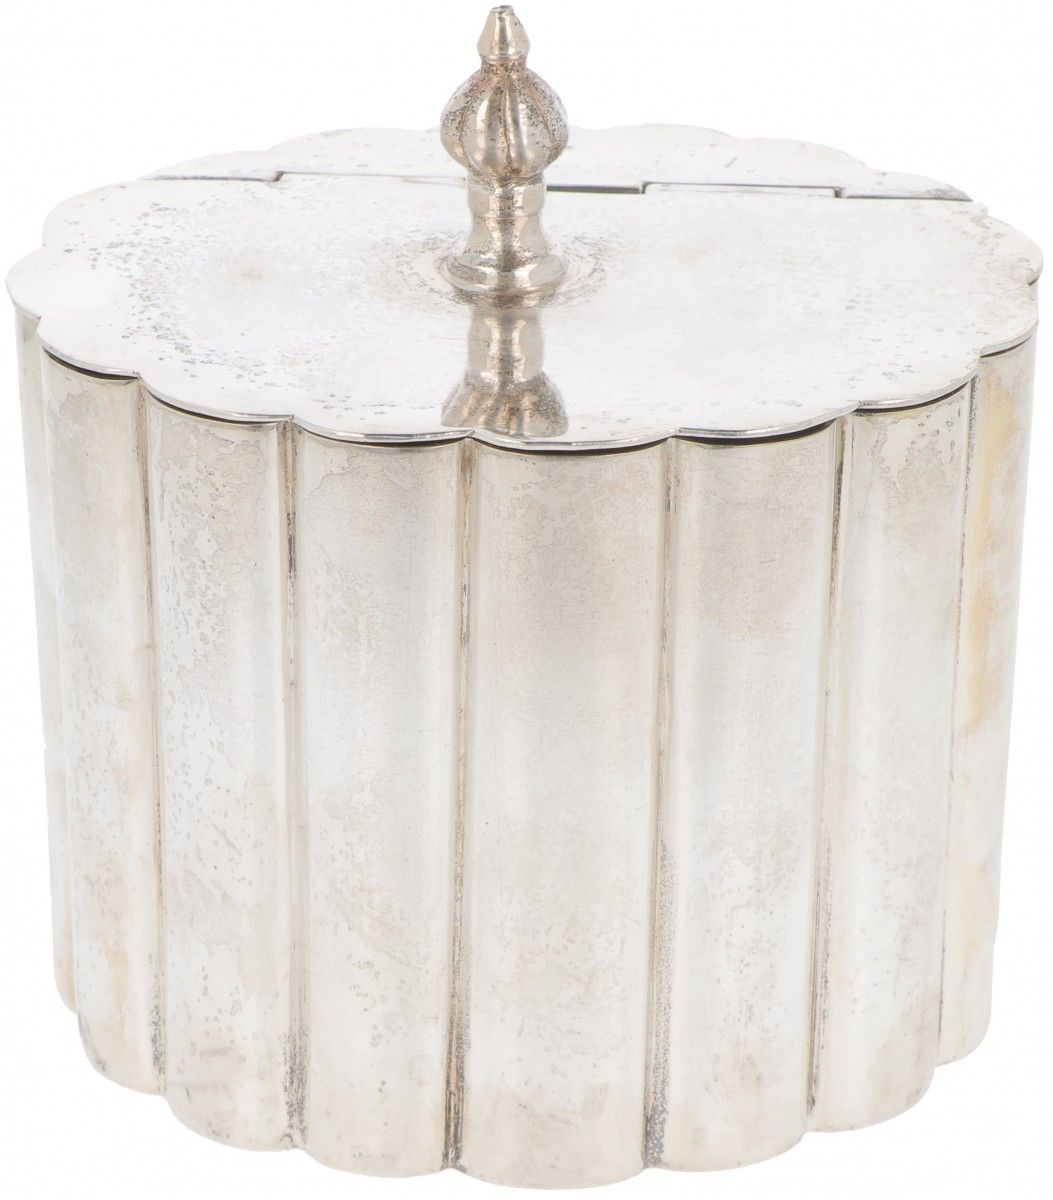 Table trash can silver-plated. Ovales, gelapptes Modell mit Scharnierdeckel. Cla&hellip;